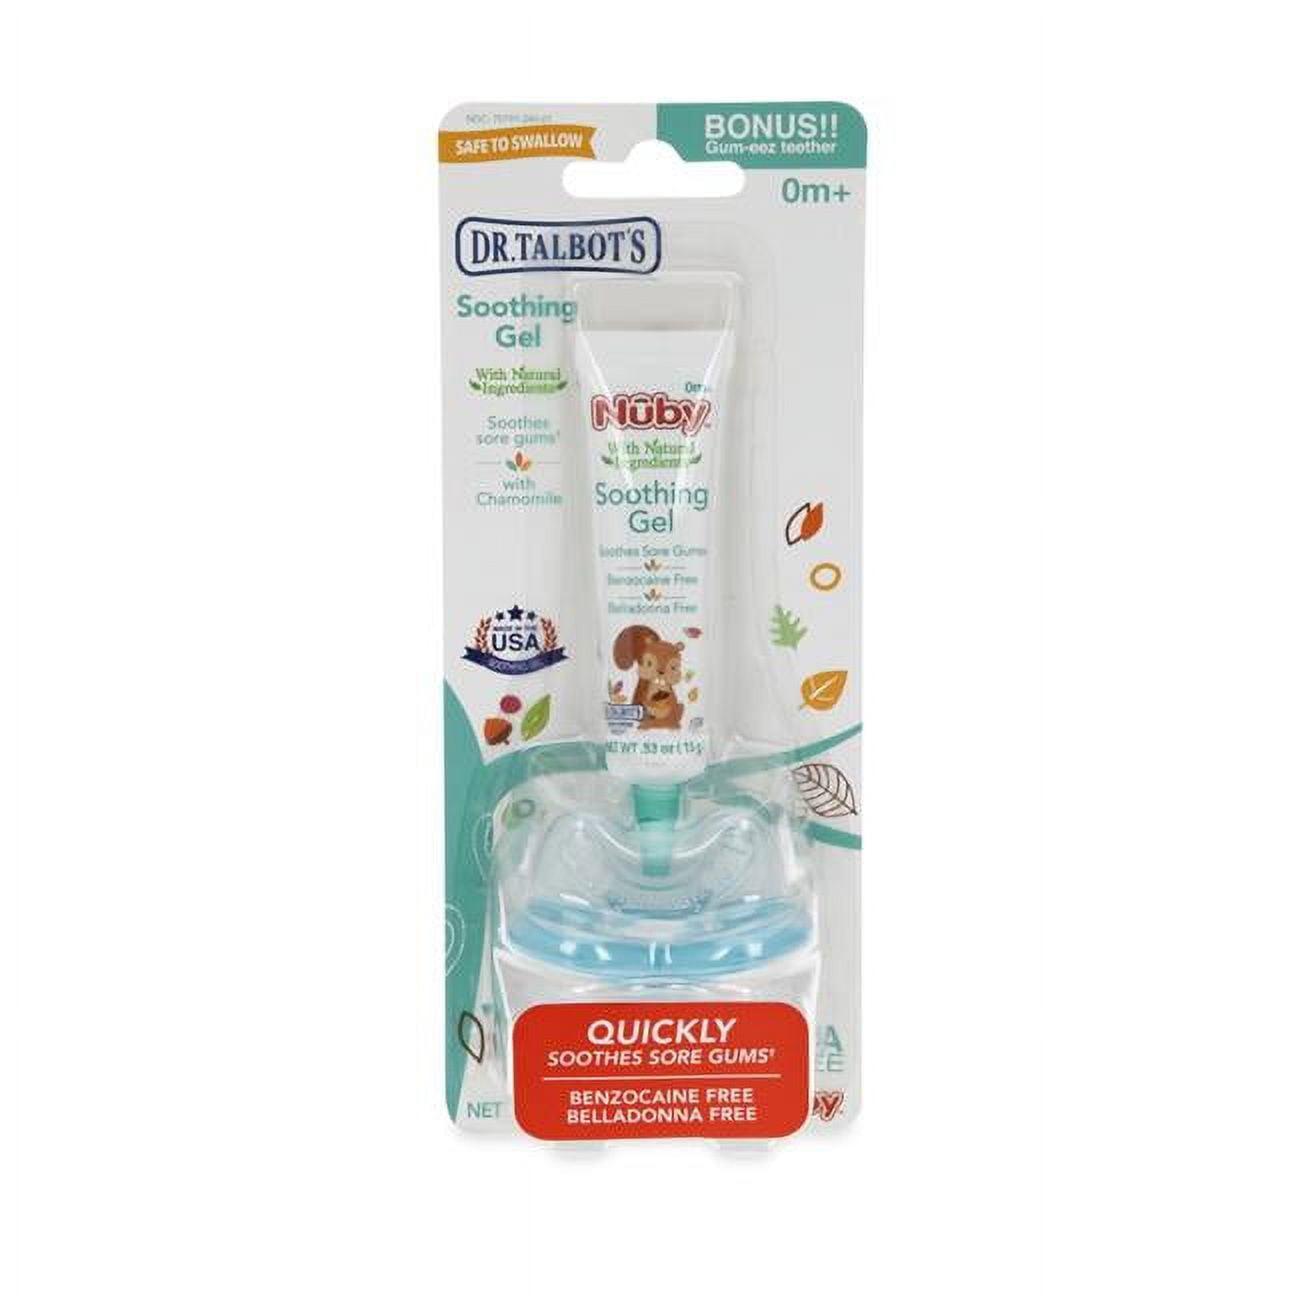 Picture of DDI 2362488 0.53 fl oz Dr. Talbots Soothing Gel for Sore Gums - Bonus Gum-eez Teether Combo - Case of 48